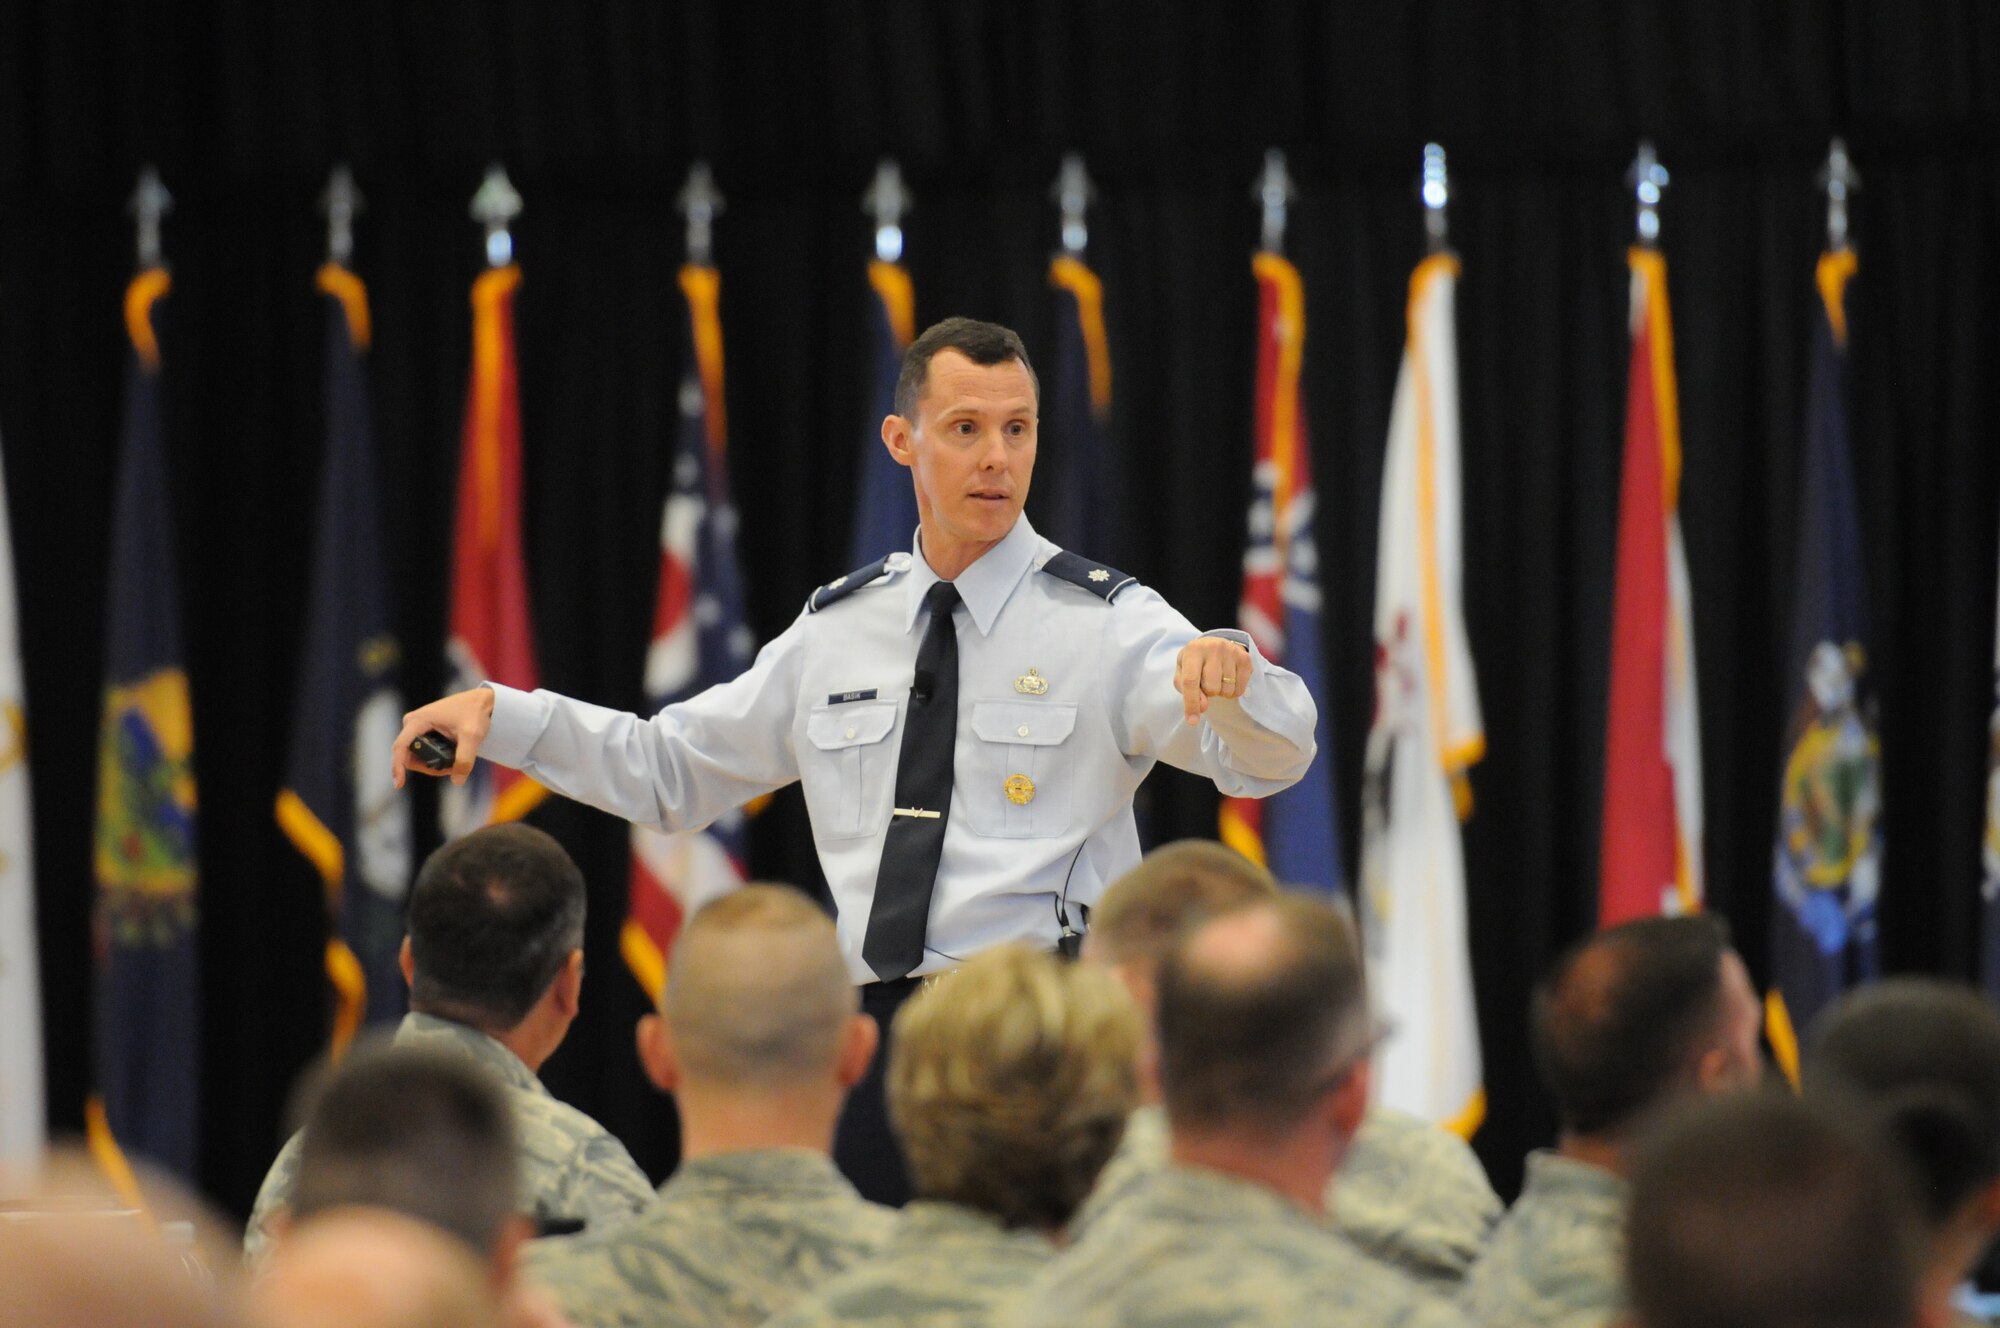 Air Force Lt. Col. Kevin Basik, Air Force representative to the Secretary of Defense for Military Professionalism, talks about better ways to communicate as a supervisor during the Air National Guard’s Enlisted Leadership Symposium, at Camp Dawson, W. Va., Aug 18, 2015. ELS is designed for enlisted Airmen of all ranks to receive professional development that can be used to better enhance Airmen’s careers. (U.S. Air National Guard photo by Master Sgt. David Eichaker/released)